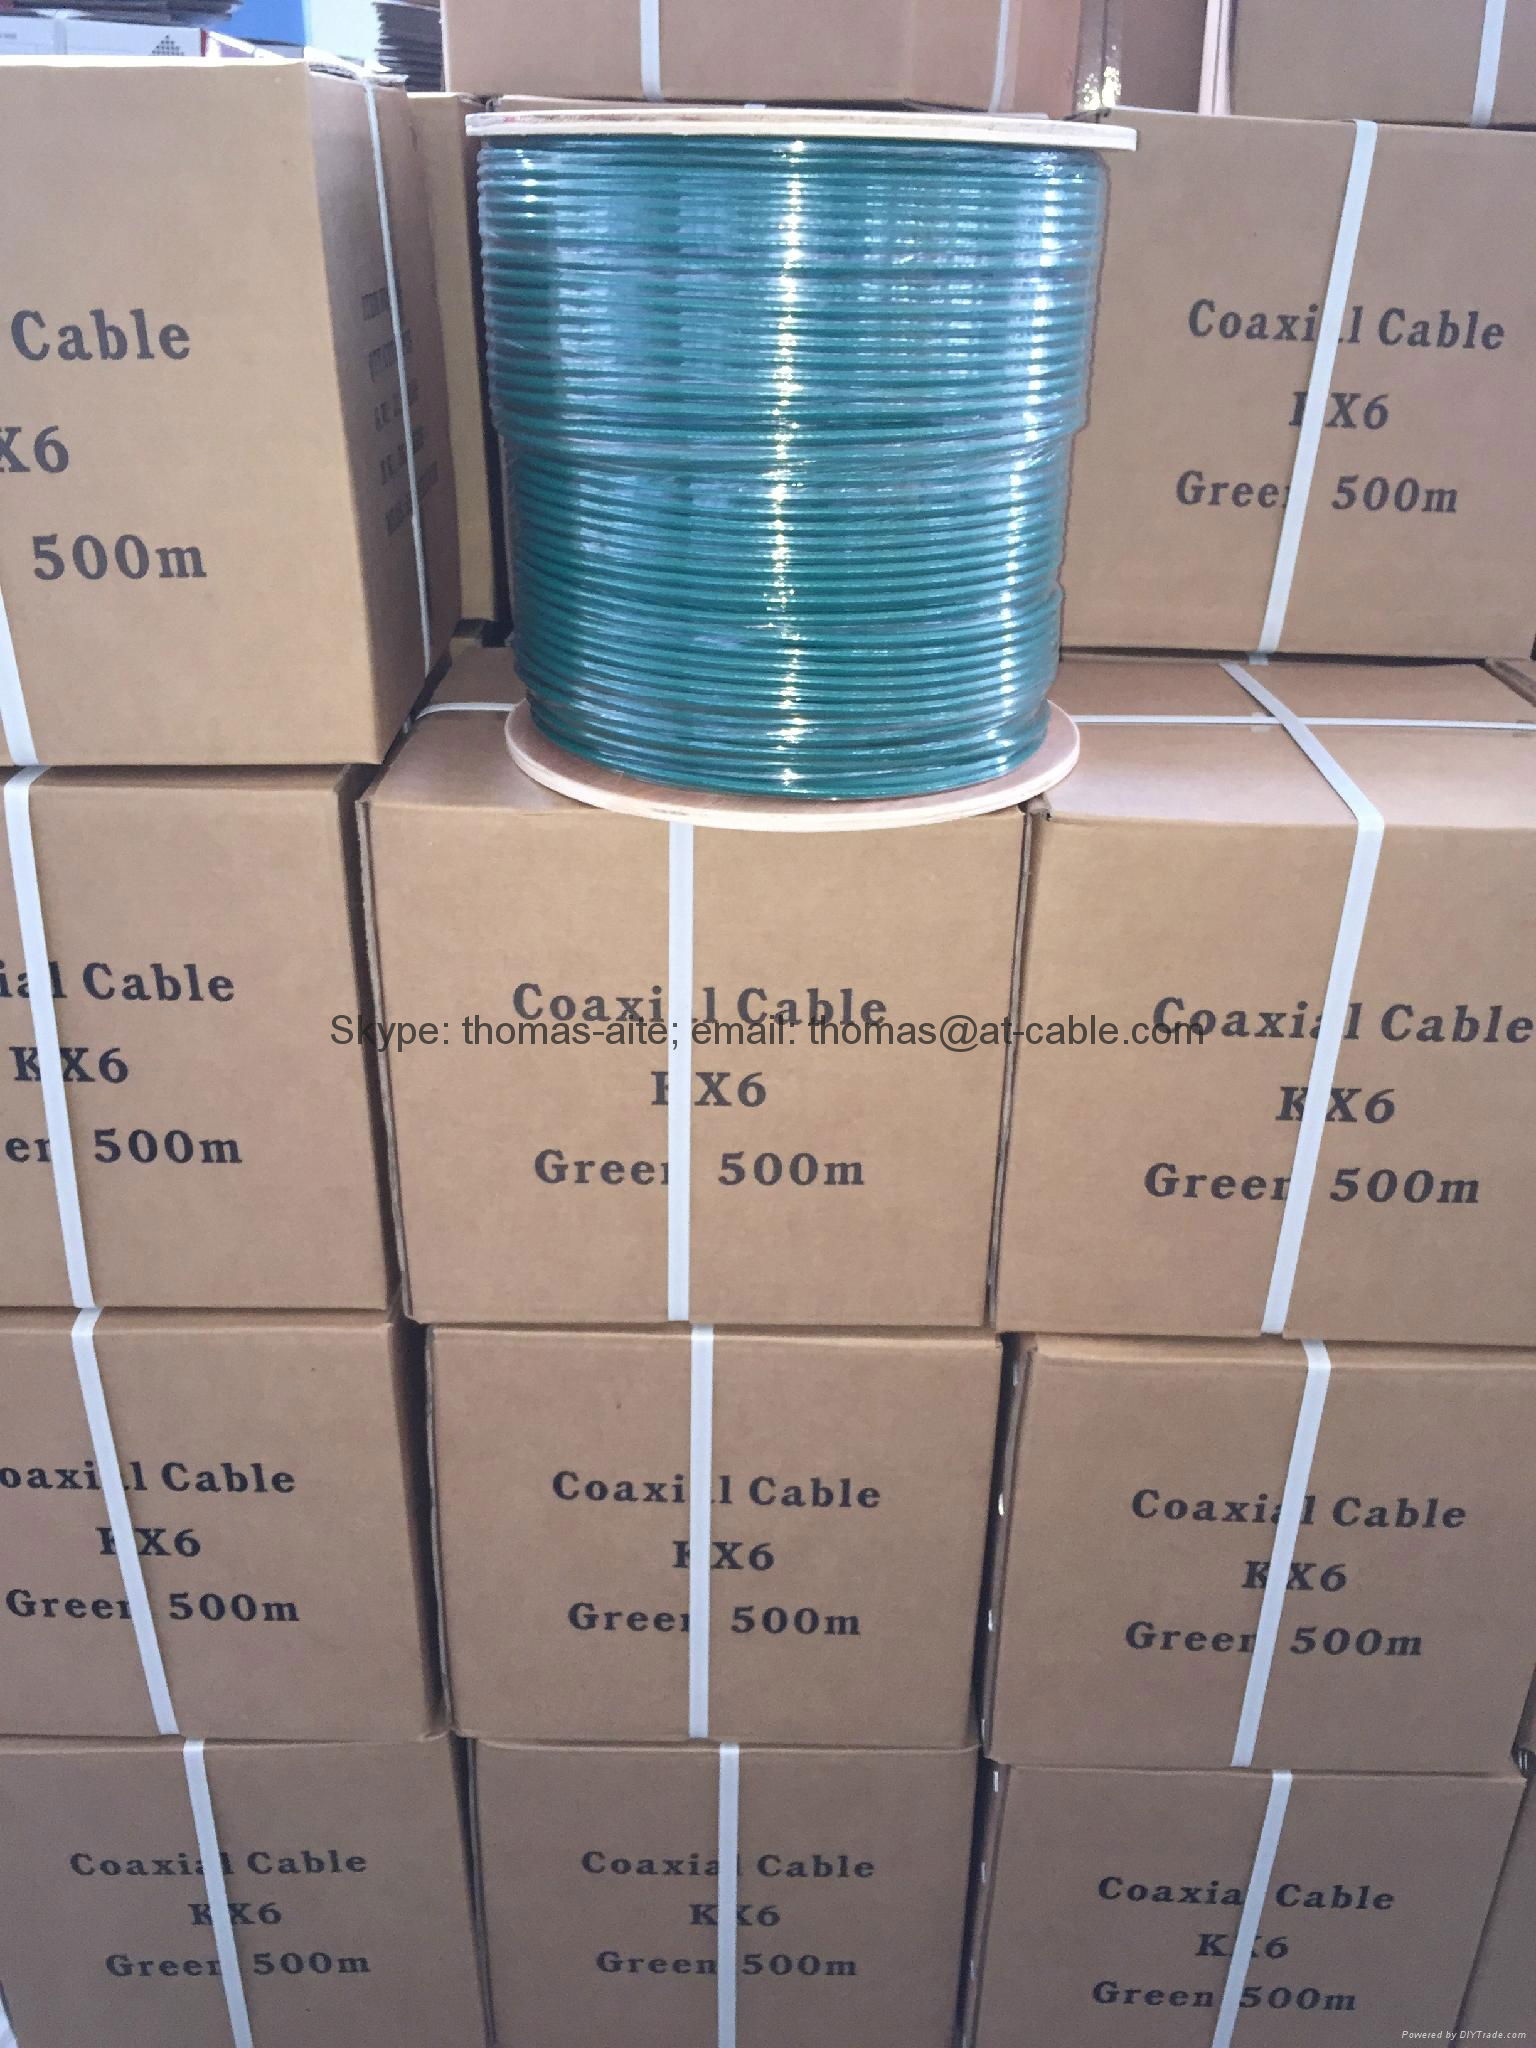 coaxial cable kx6 305m wooden drum